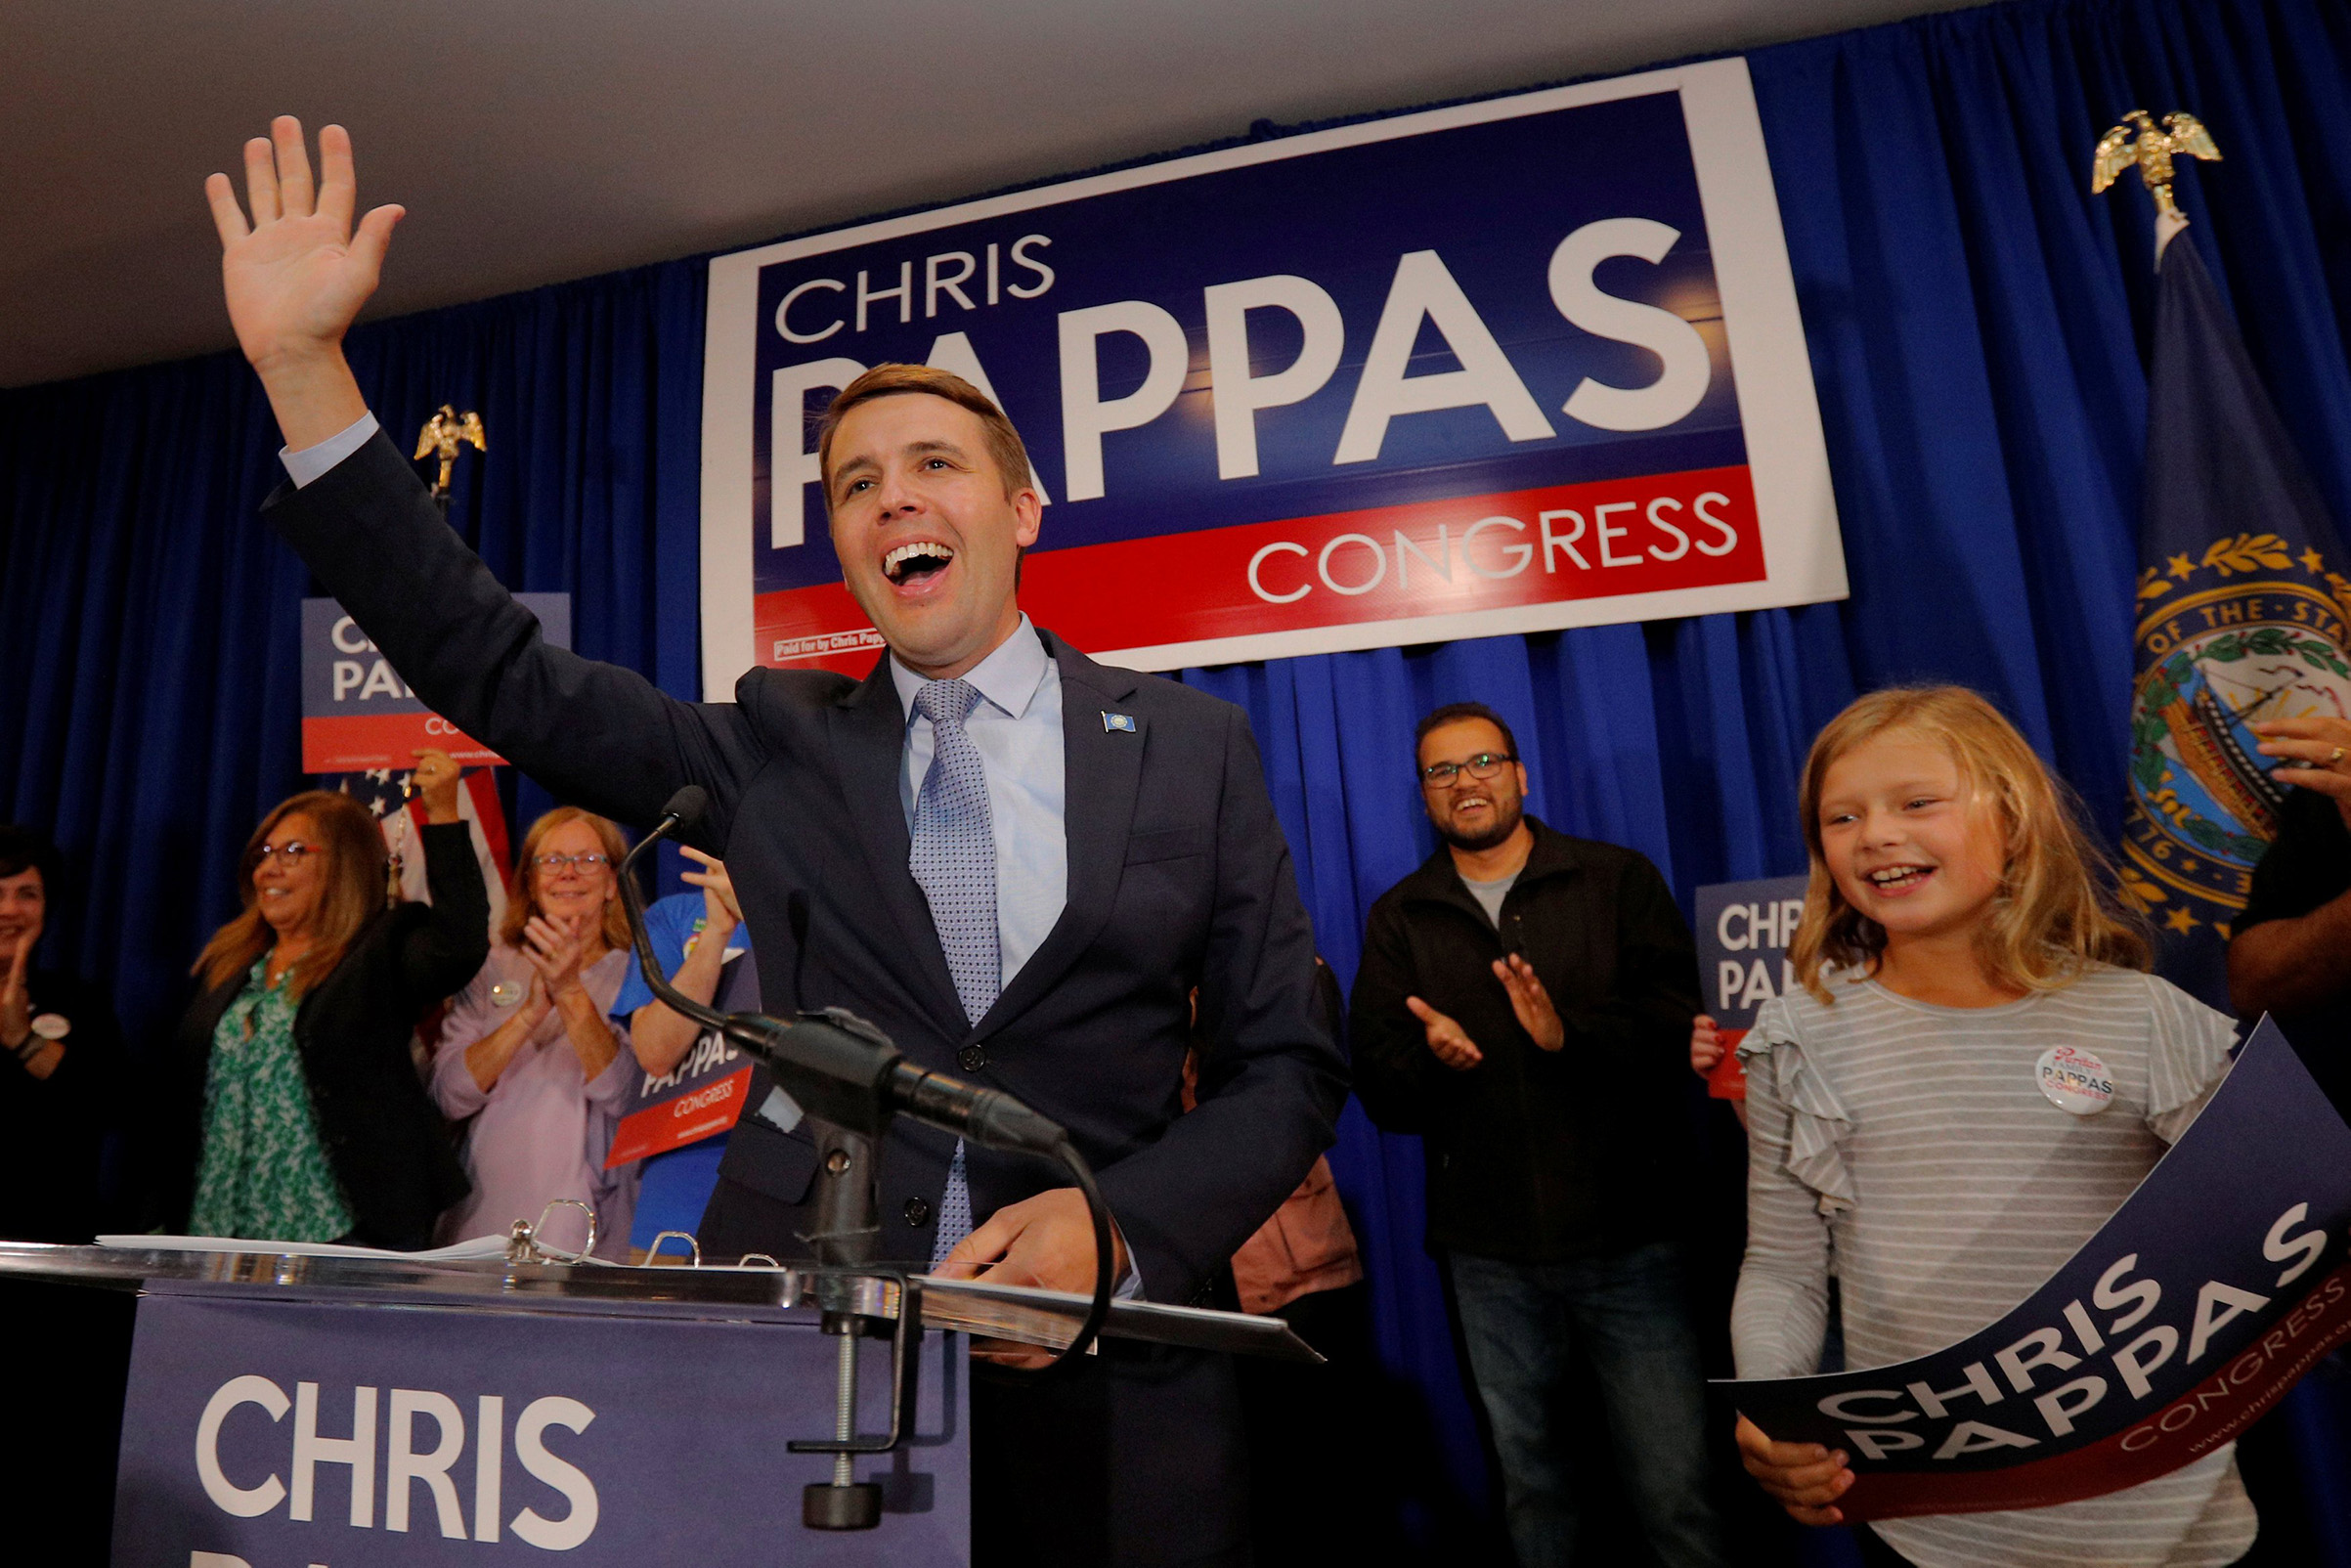 Democratic candidate for the U.S. House of Representatives Pappas takes the stage at his primary election rally in Manchester (Brian Snyder—Reuters)